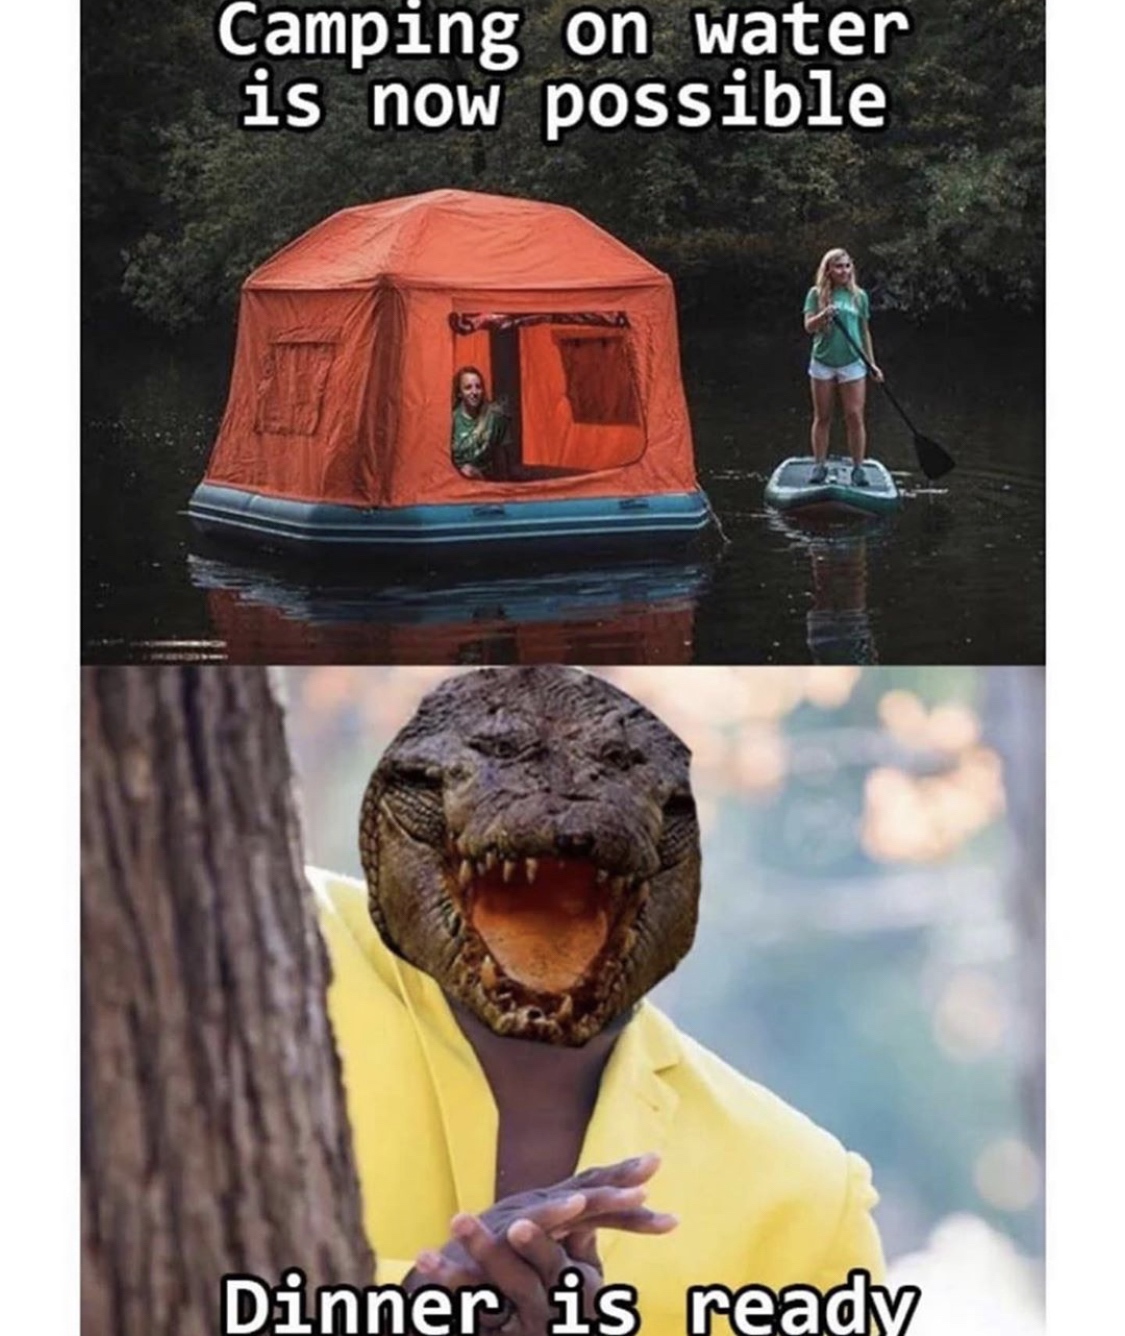 chickfila and popeyes memes - Camping on water is now possible Dinner is ready